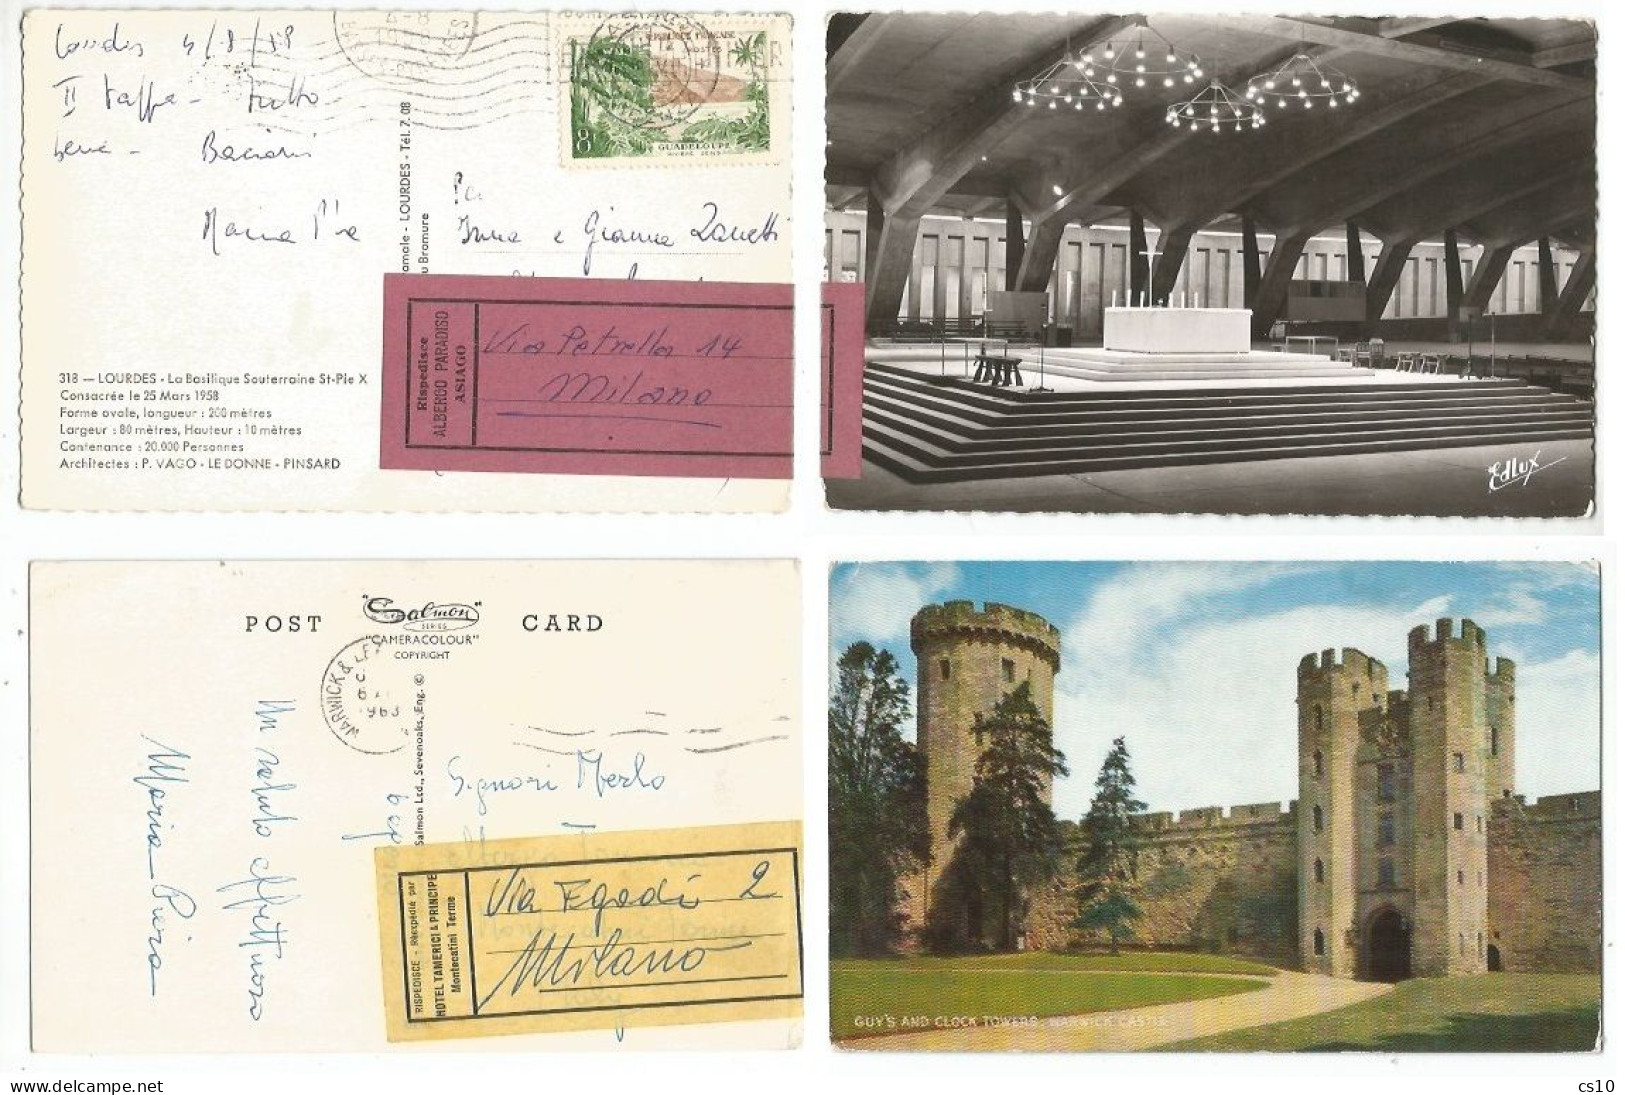 Hotel Mail Forwarding Labels # 2 Pcards From UK & France By 2 Different Italy Hotels Asiago 1958 & Montecatini Terme '63 - Post